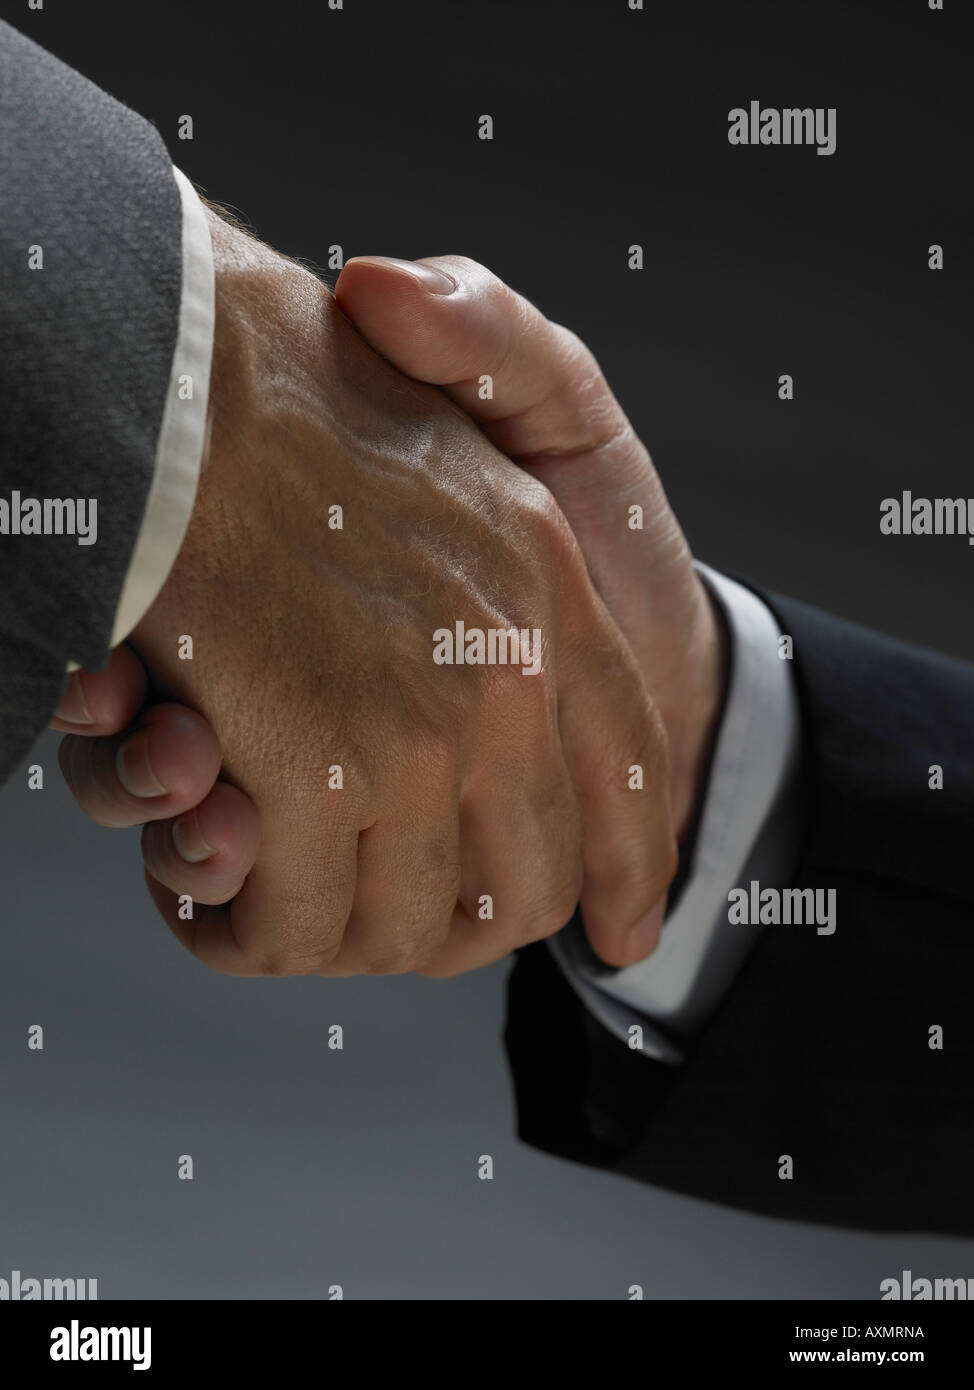 Two men shaking hands Stock Photo